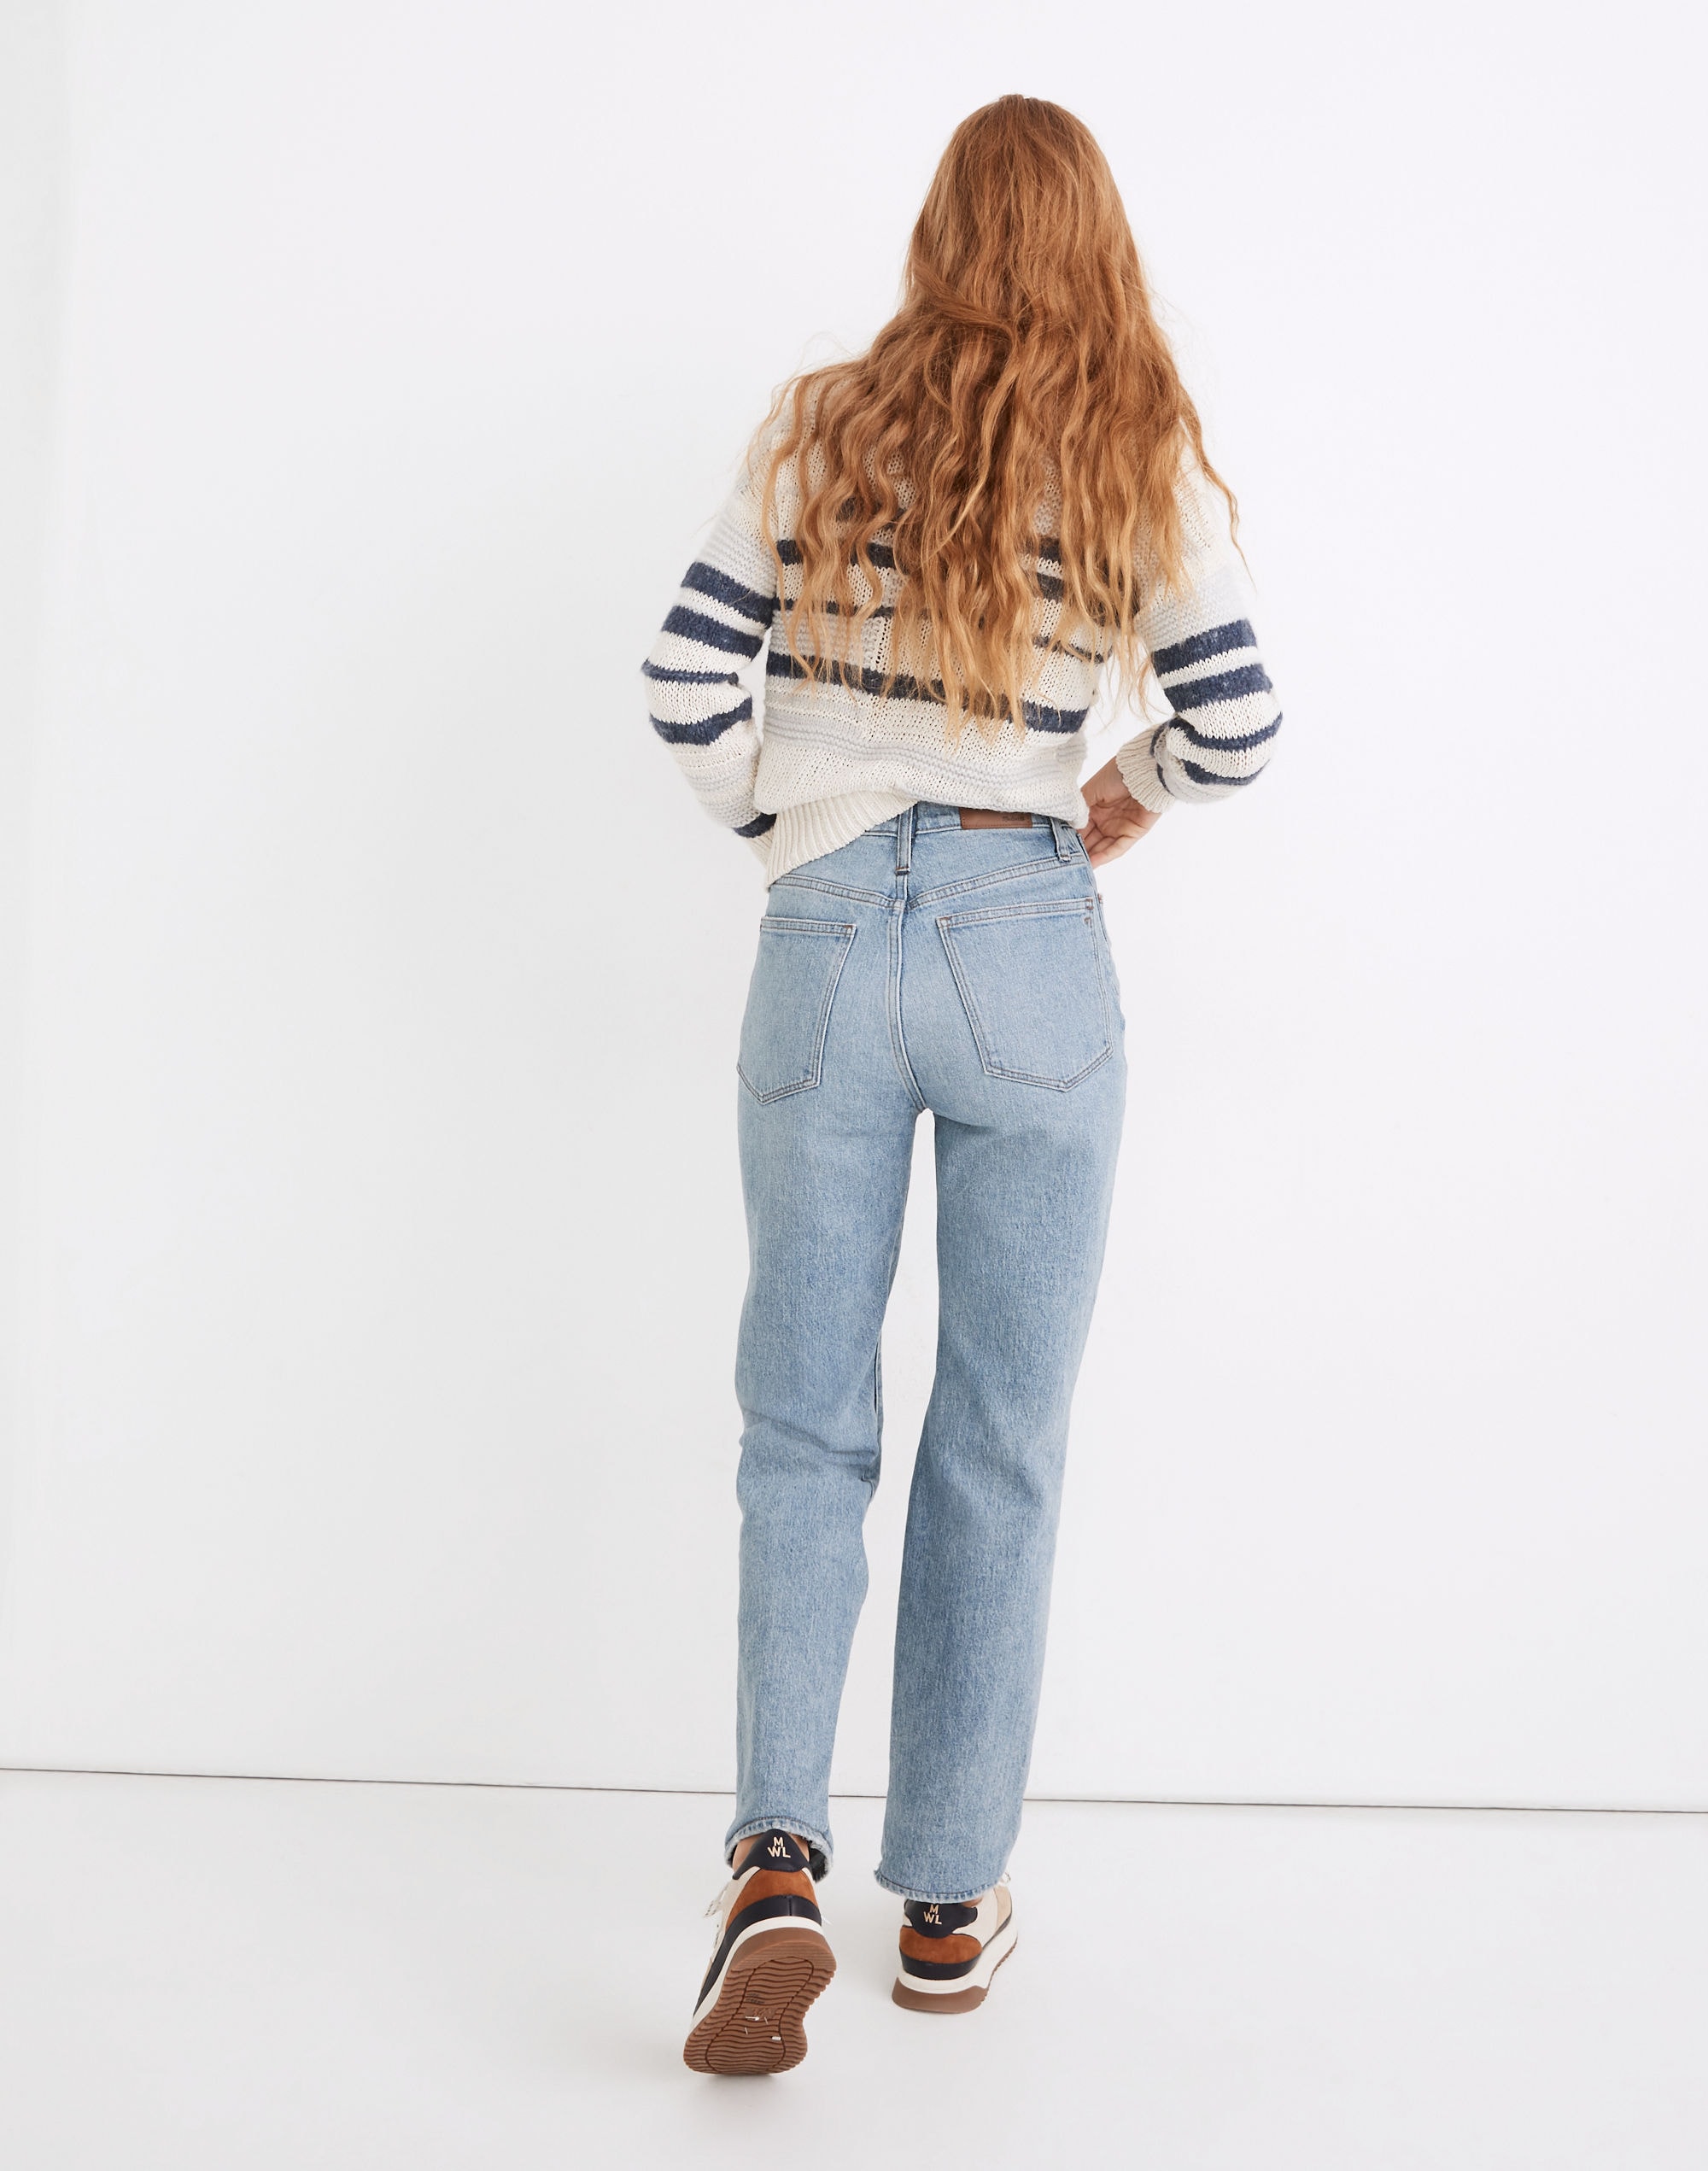 The Perfect Vintage Straight Jean in Mayfield Wash